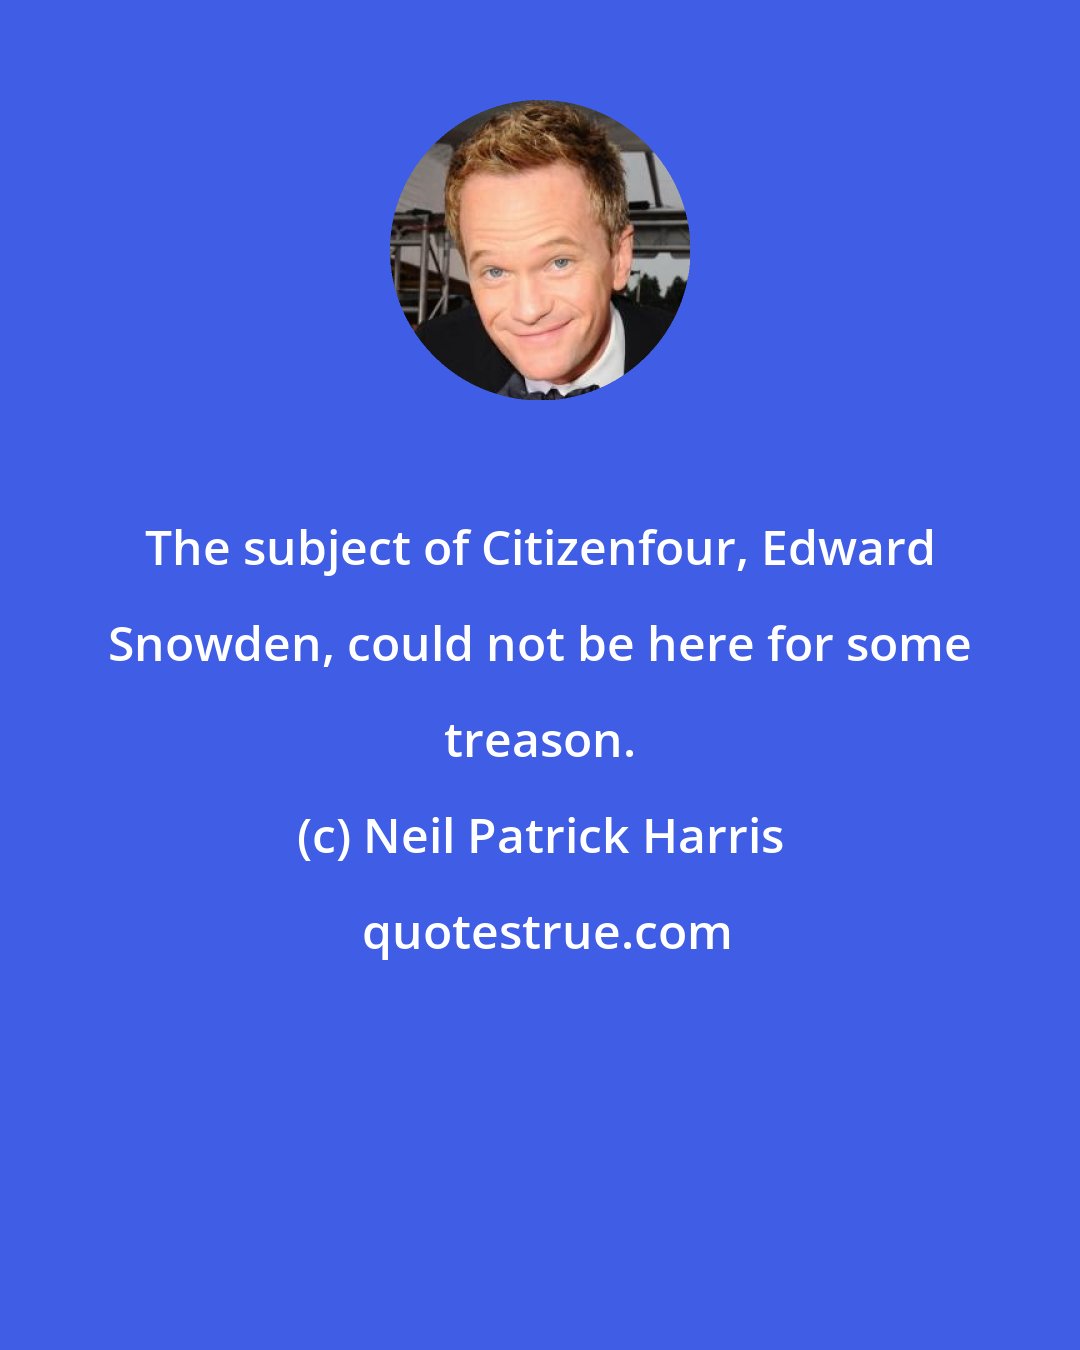 Neil Patrick Harris: The subject of Citizenfour, Edward Snowden, could not be here for some treason.